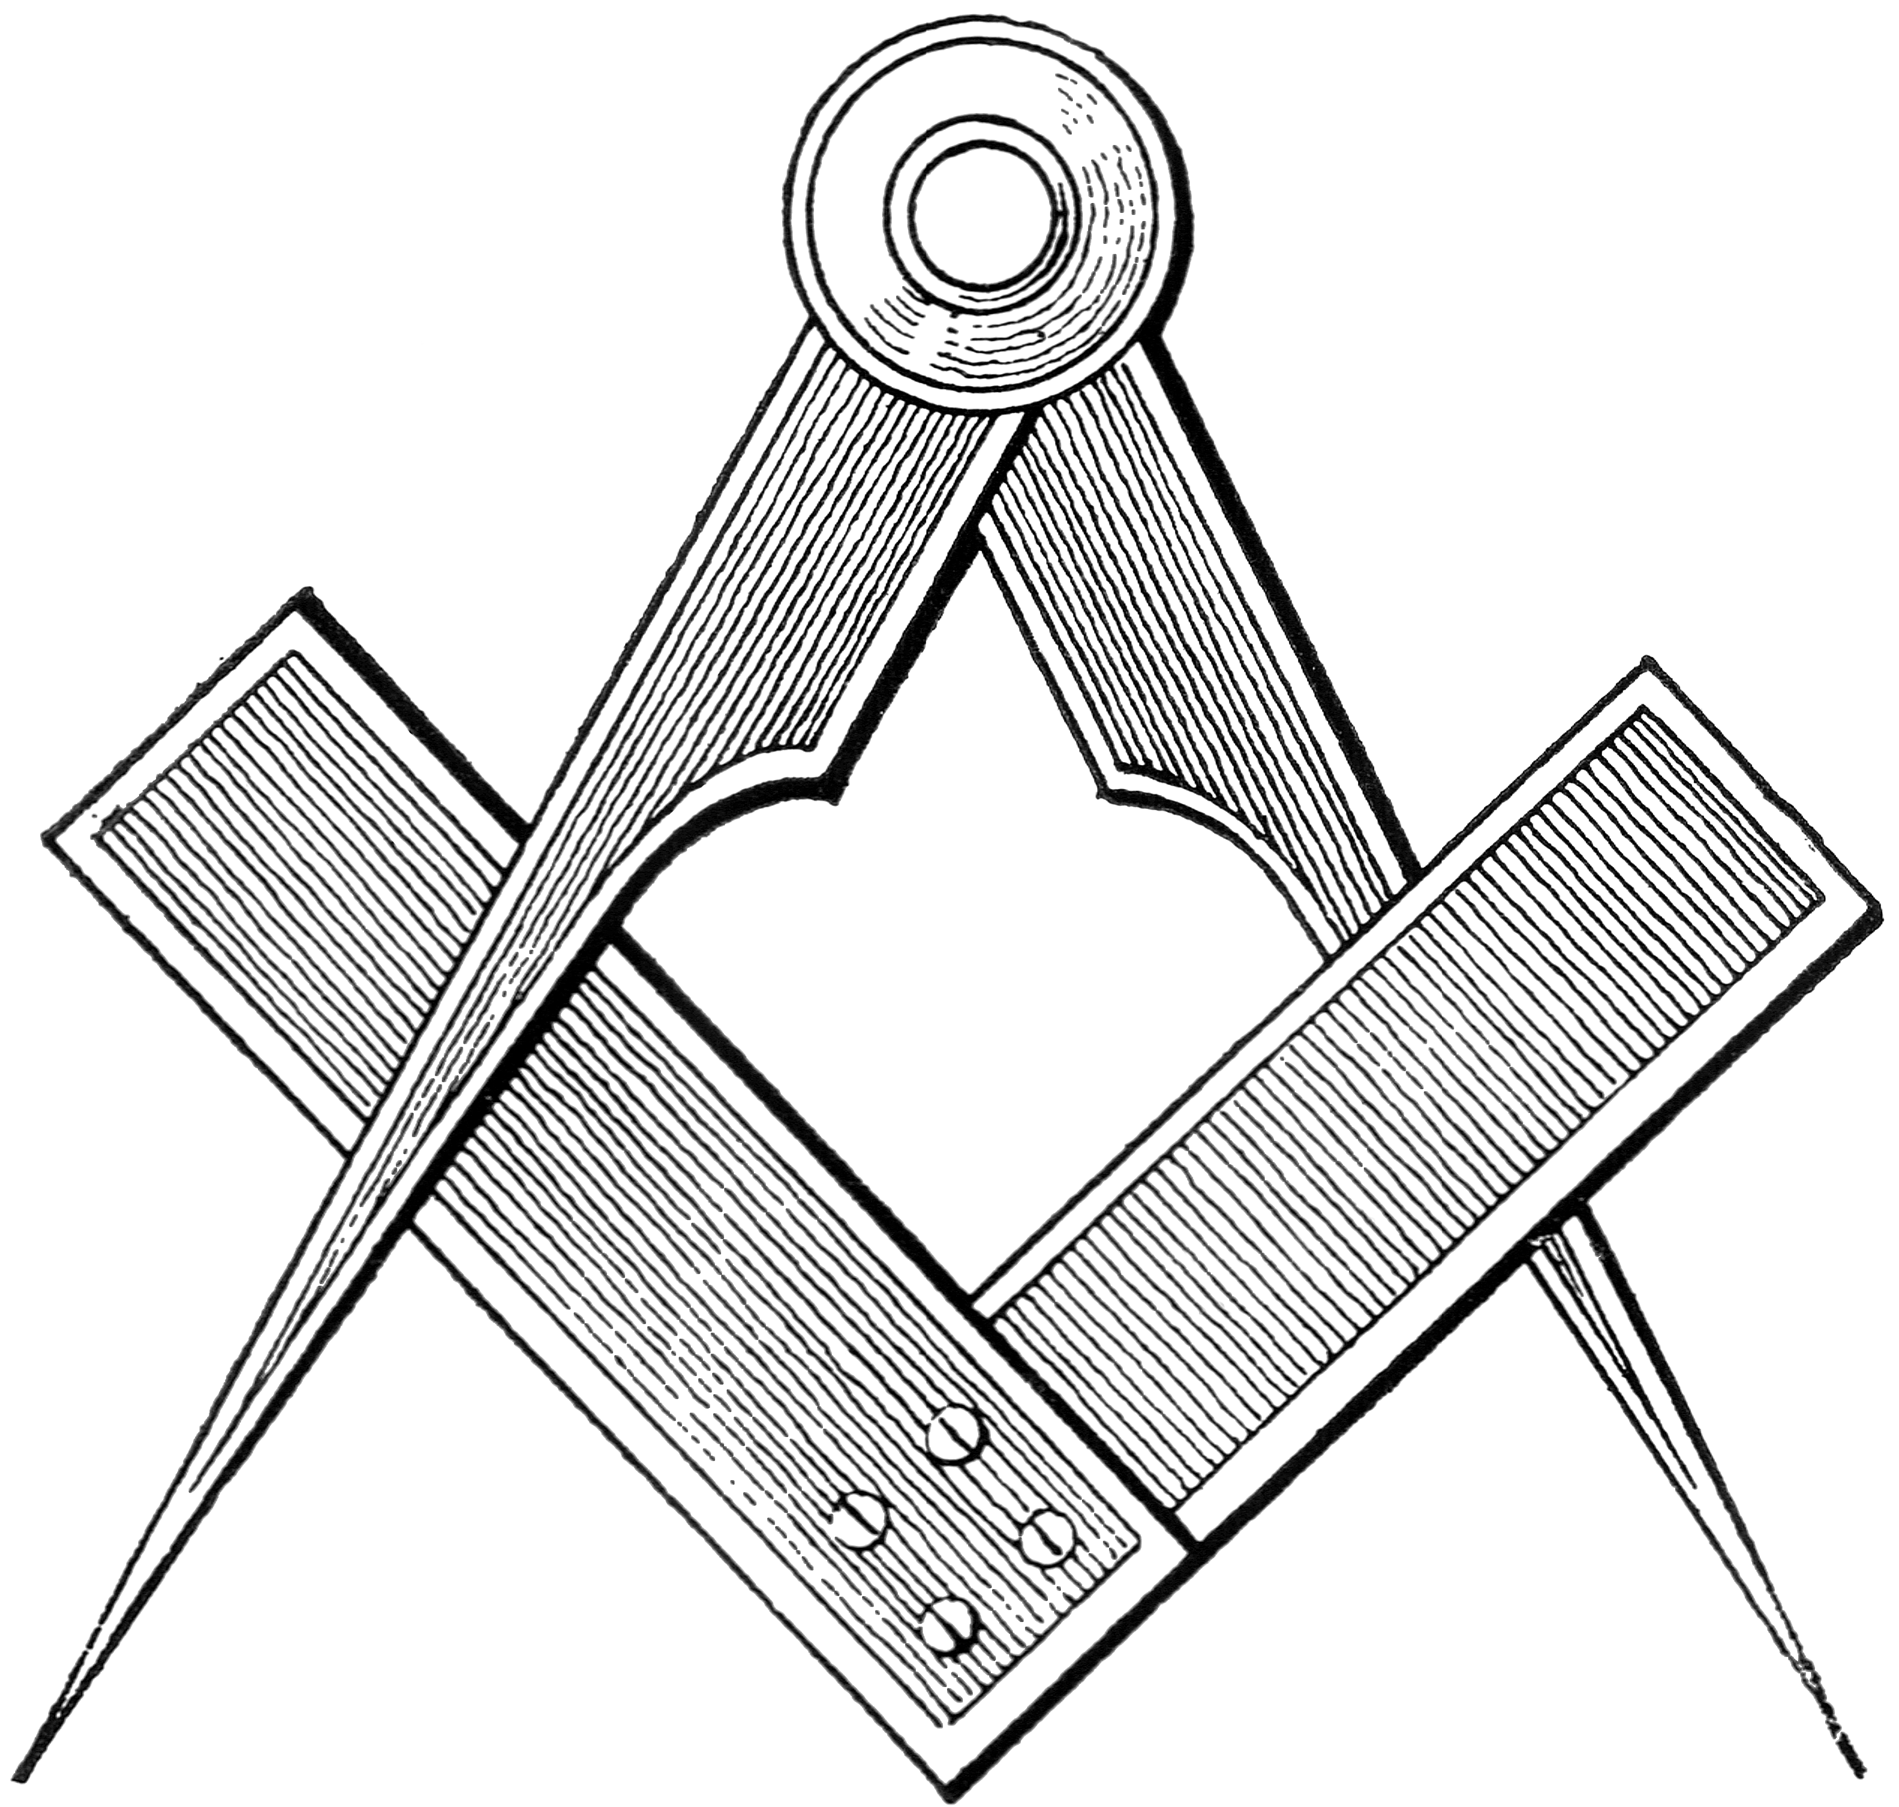 https://freemasonry.bcy.ca/images_download/s_c1941.gif